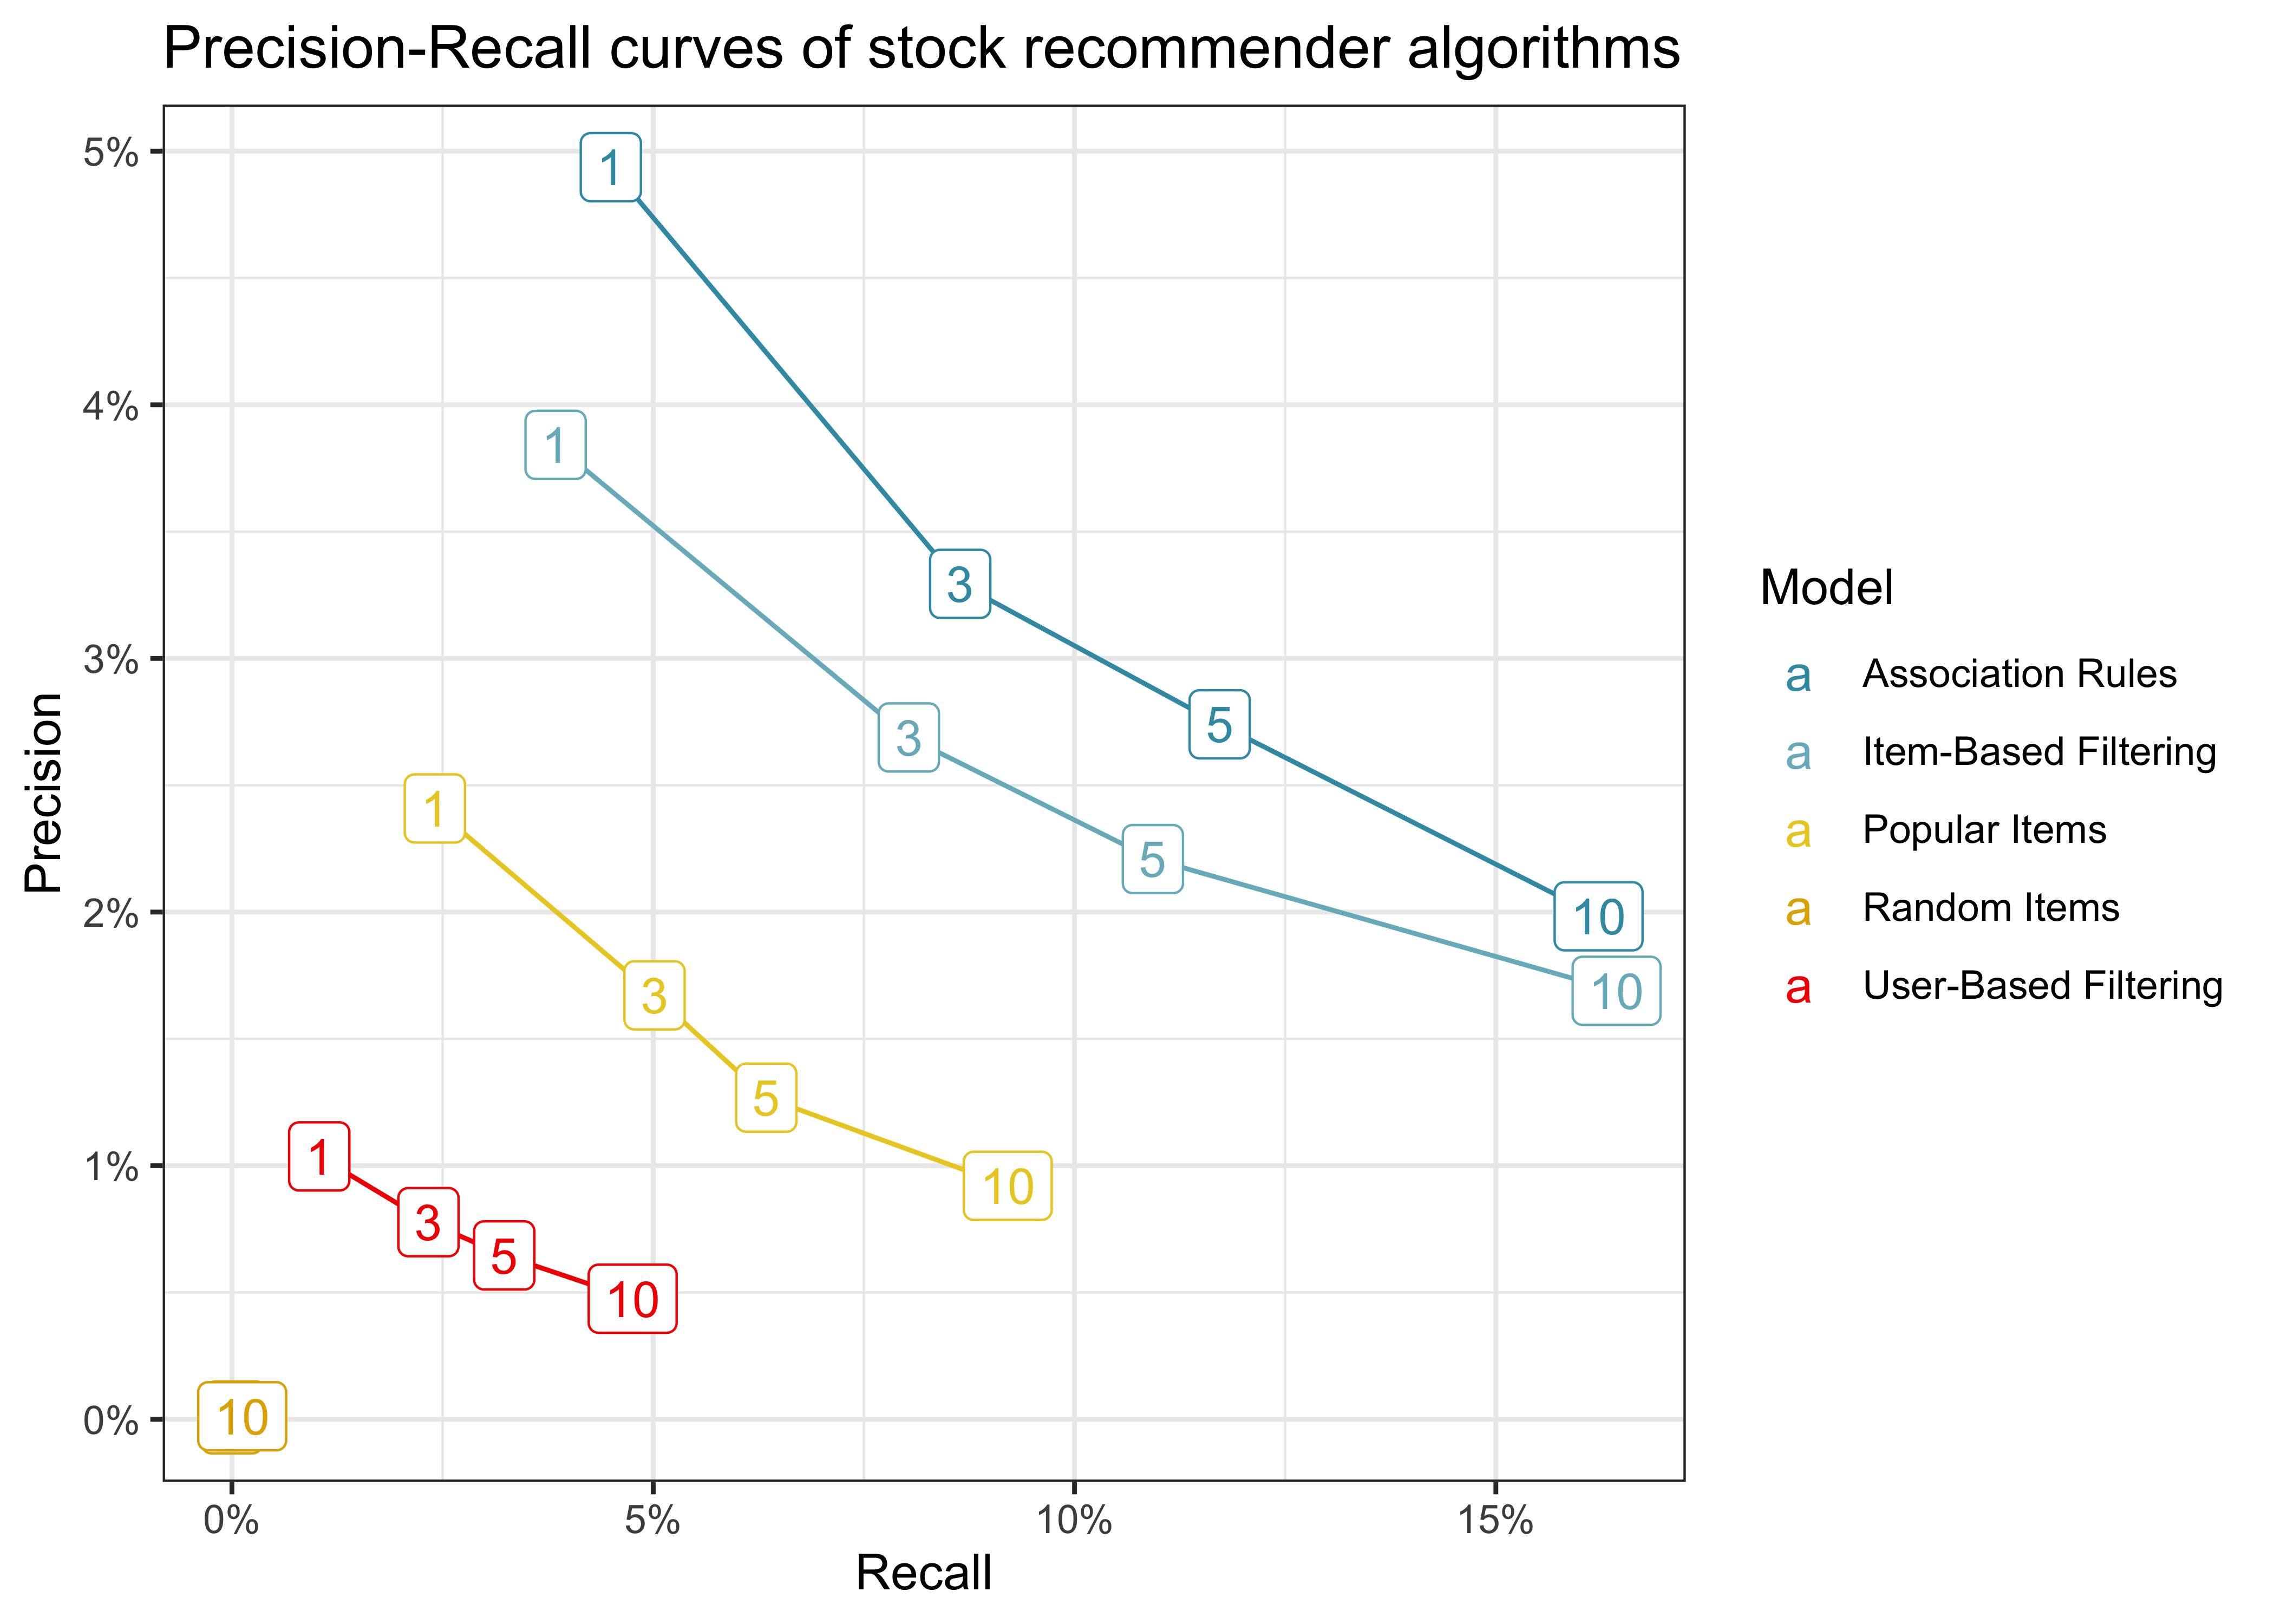 Title: Precision-Recall curves of stock recommender algorithms. The figure shows that the association rules mining algorithm achieves the highest precision for any level of recall.